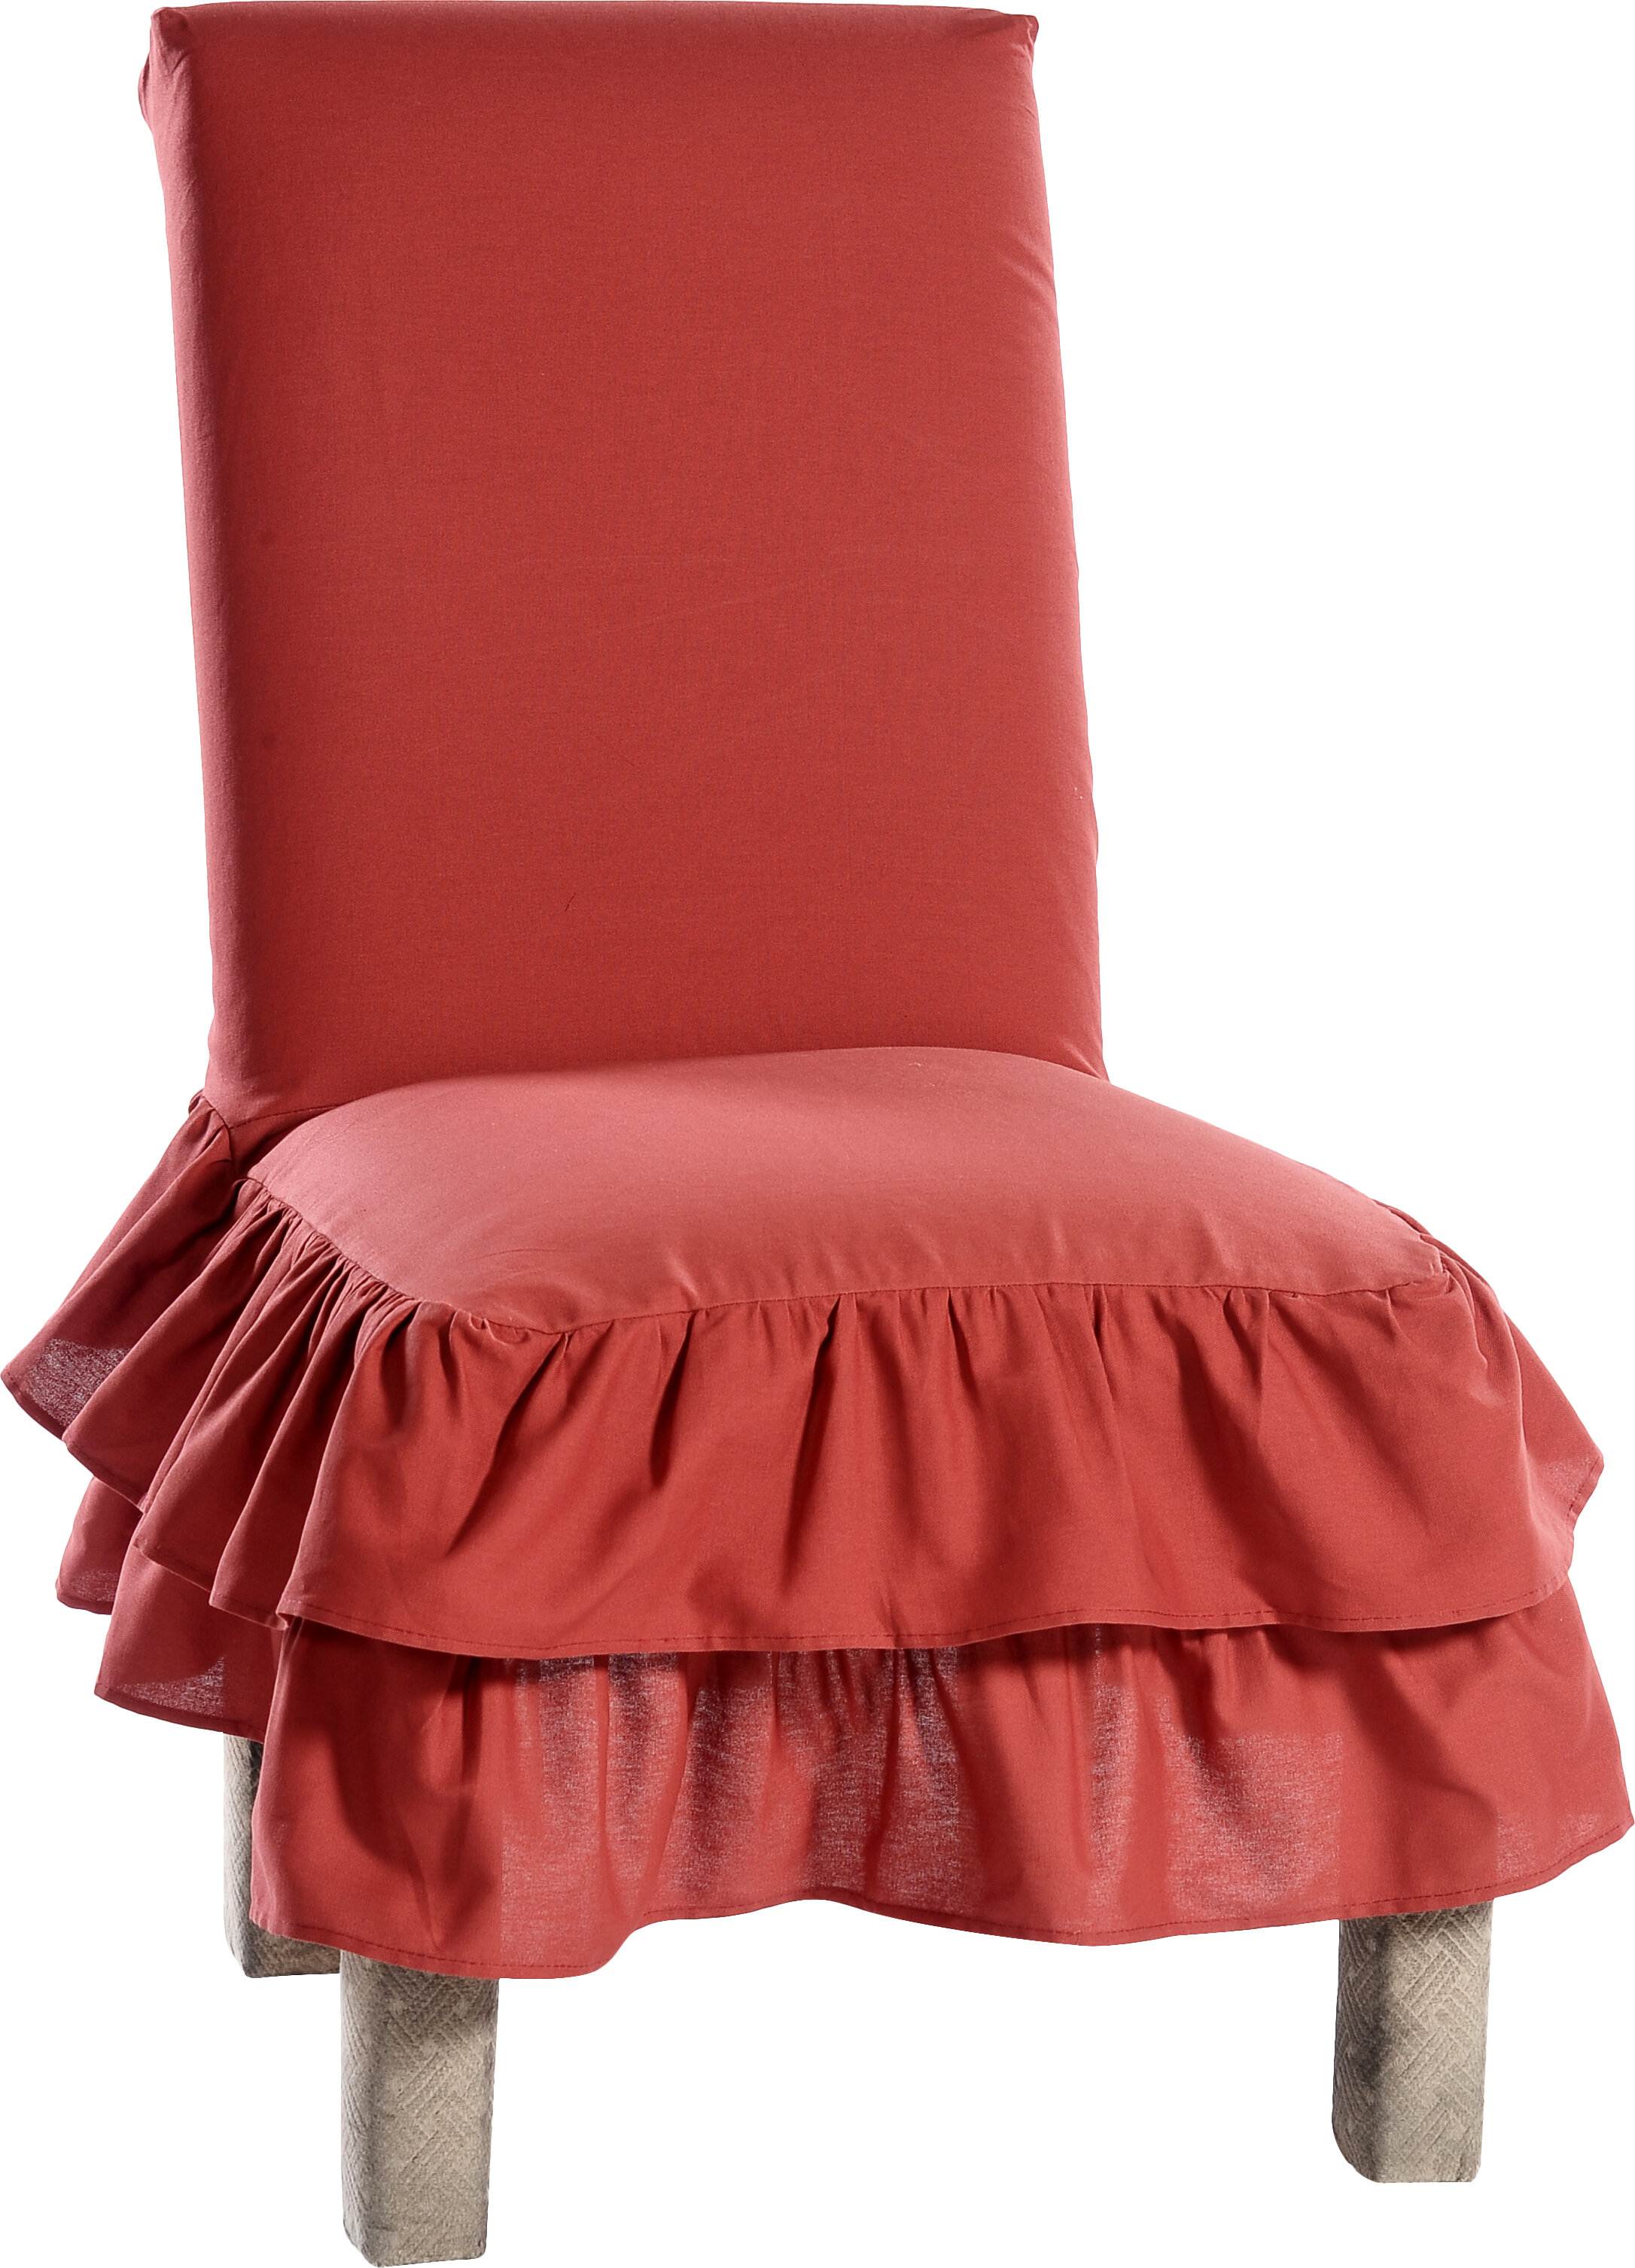 skirted dining chair covers